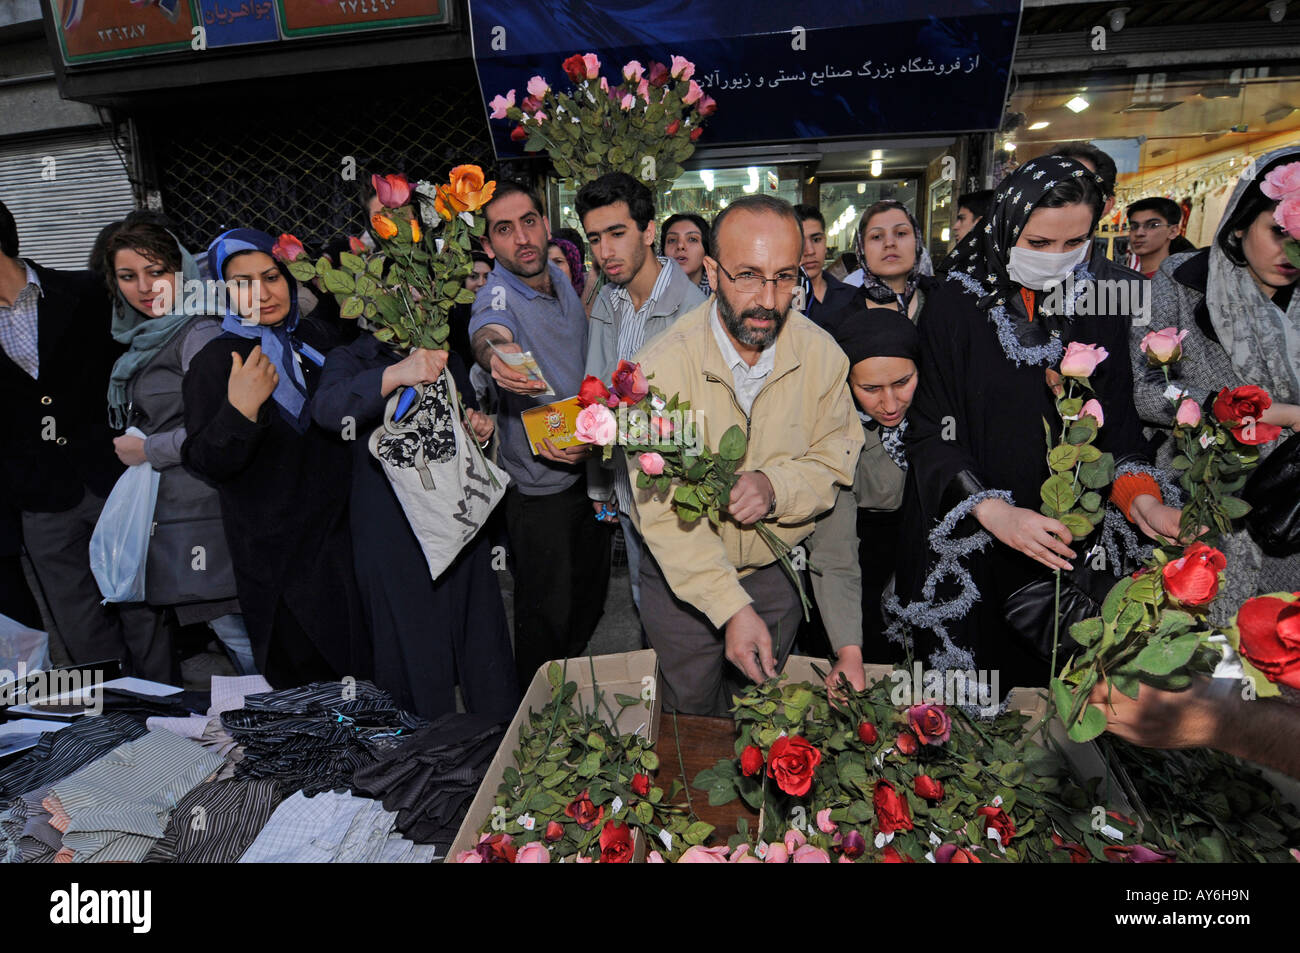 Iranian people buying flowers at an outdoor market ahead of the solar new year 'Nowruz' celebrations in Tehran, Iran Stock Photo